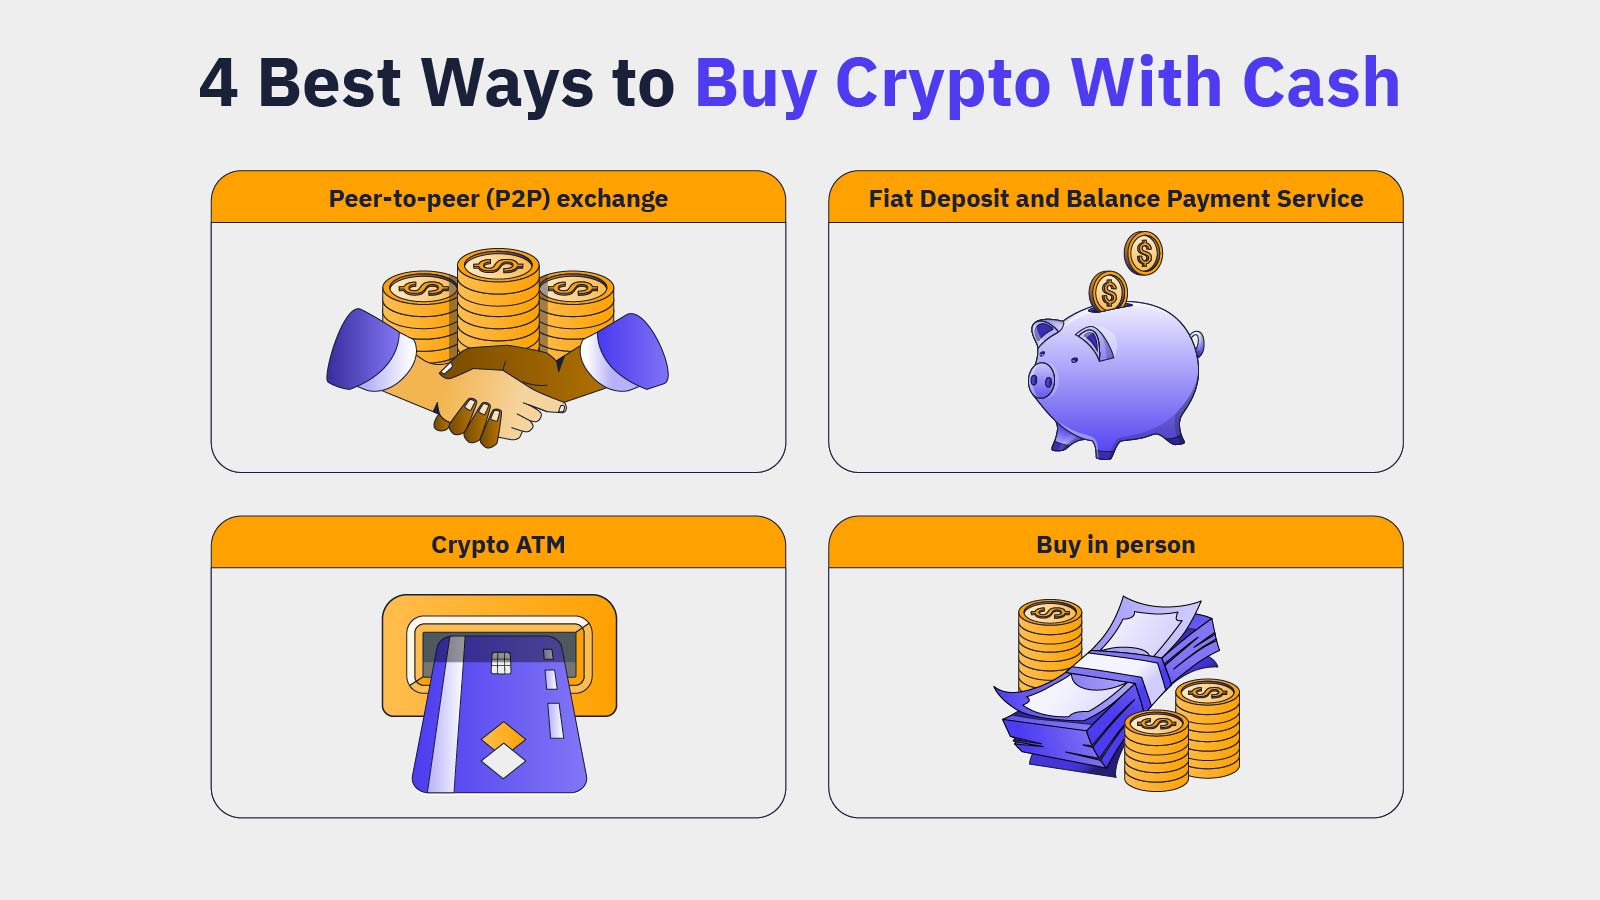 4 Best Ways to Buy Crypto with Cash